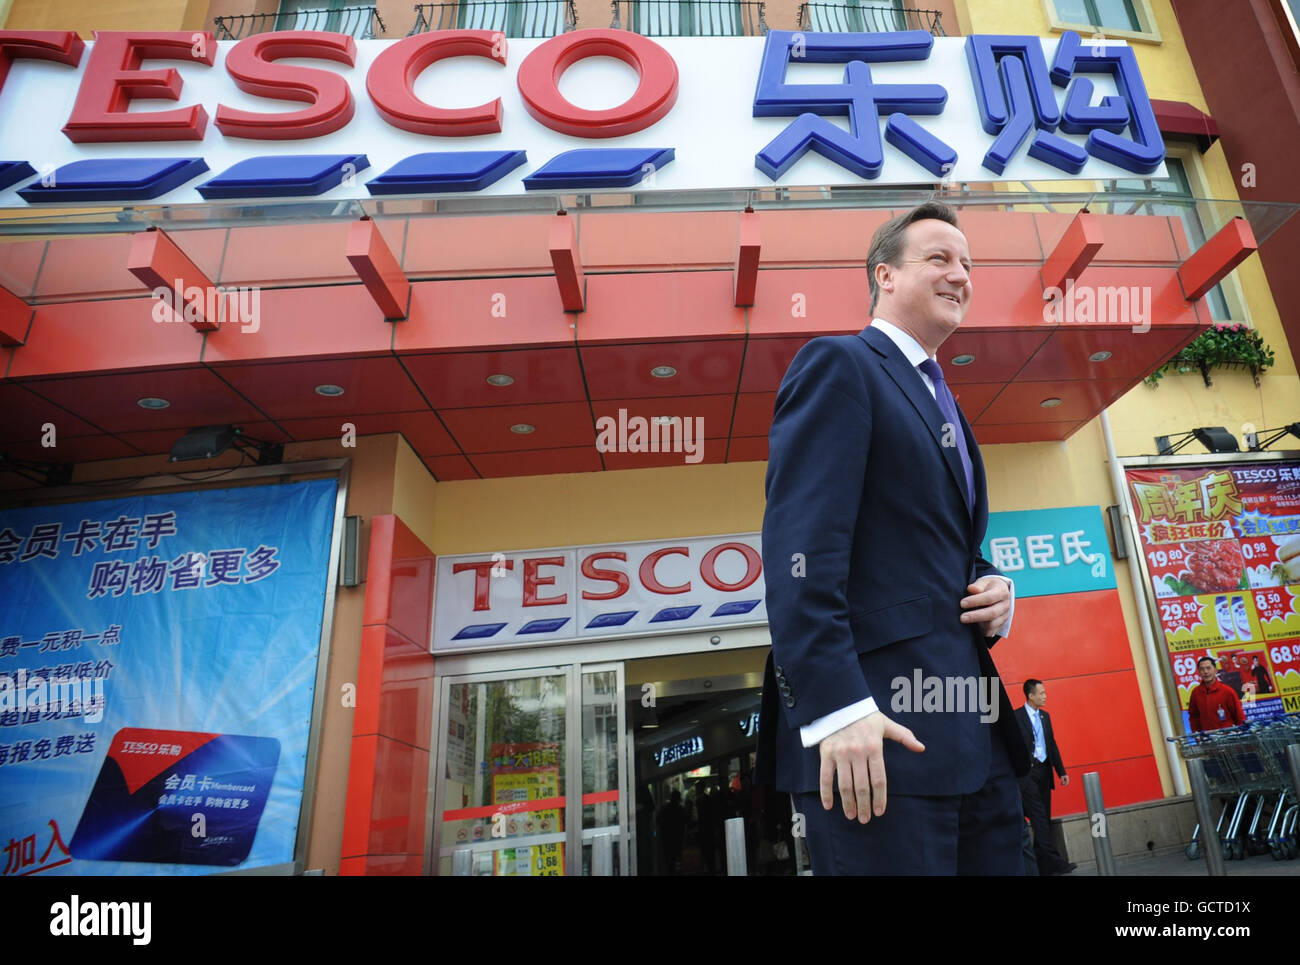 British Prime Minister David Cameron visits a Tesco supermarket in Beijing today on the first day of his visit to China accompanied by a 50 strong business delegation of UK leading companies. Stock Photo